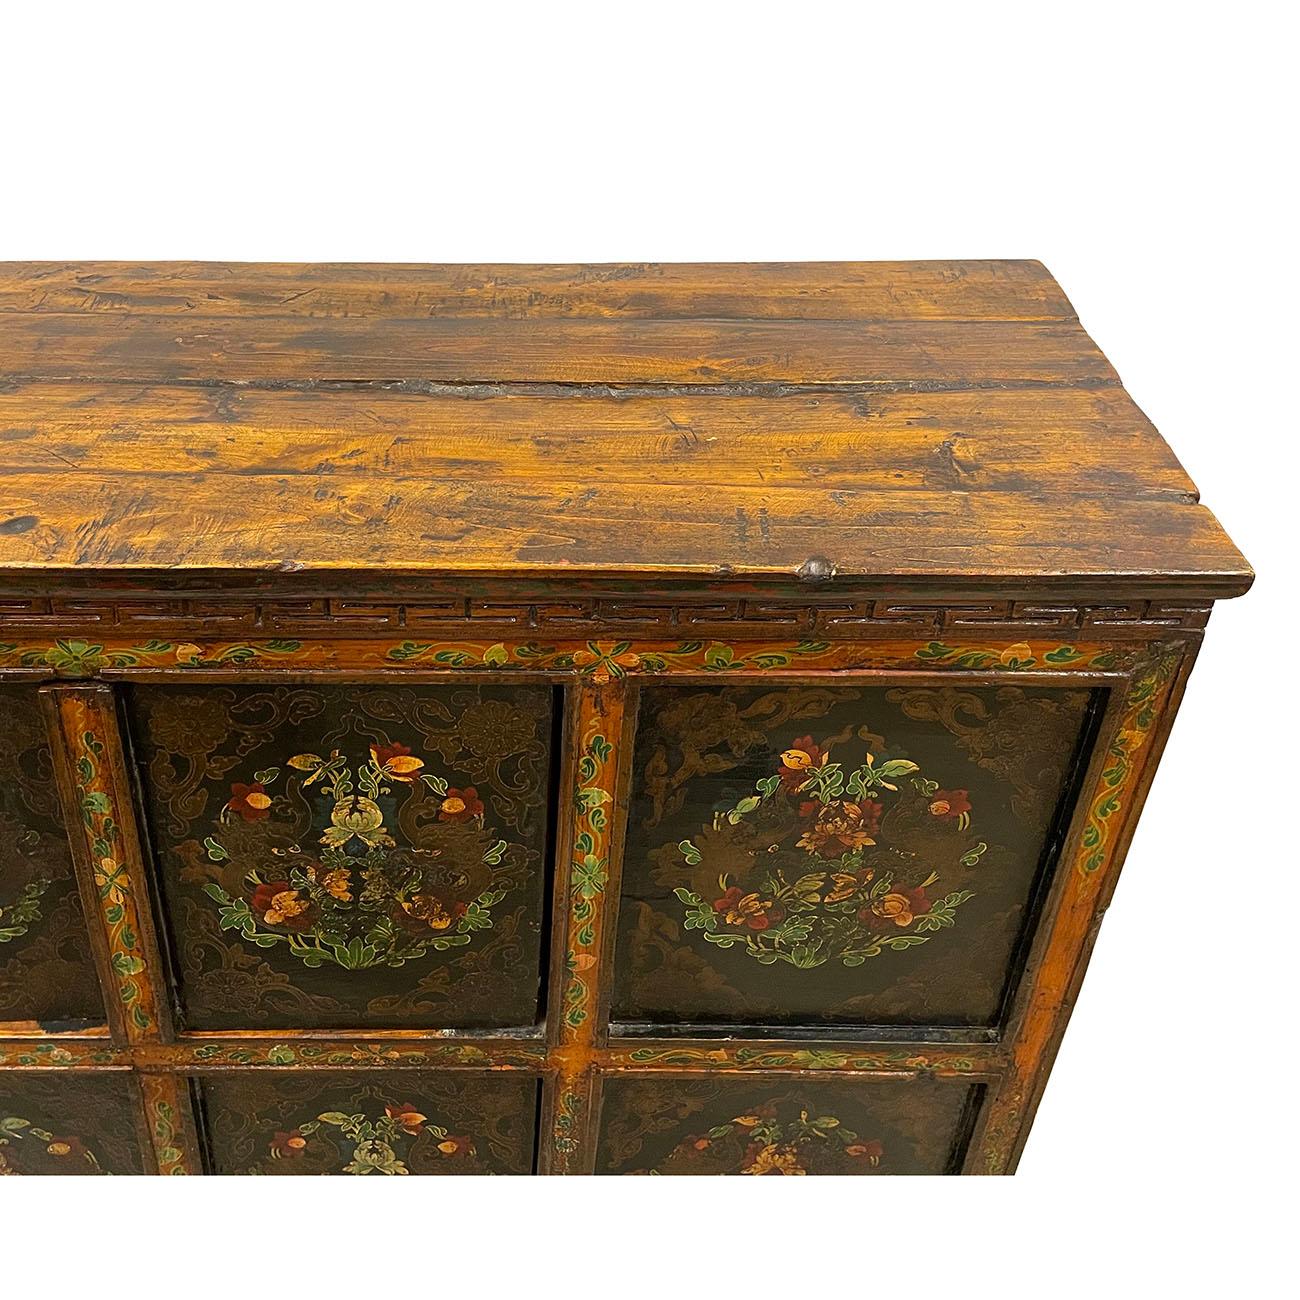 19th Century Antique Tibetan Hand Painted Tall Credenza Storage Cabinet For Sale 3